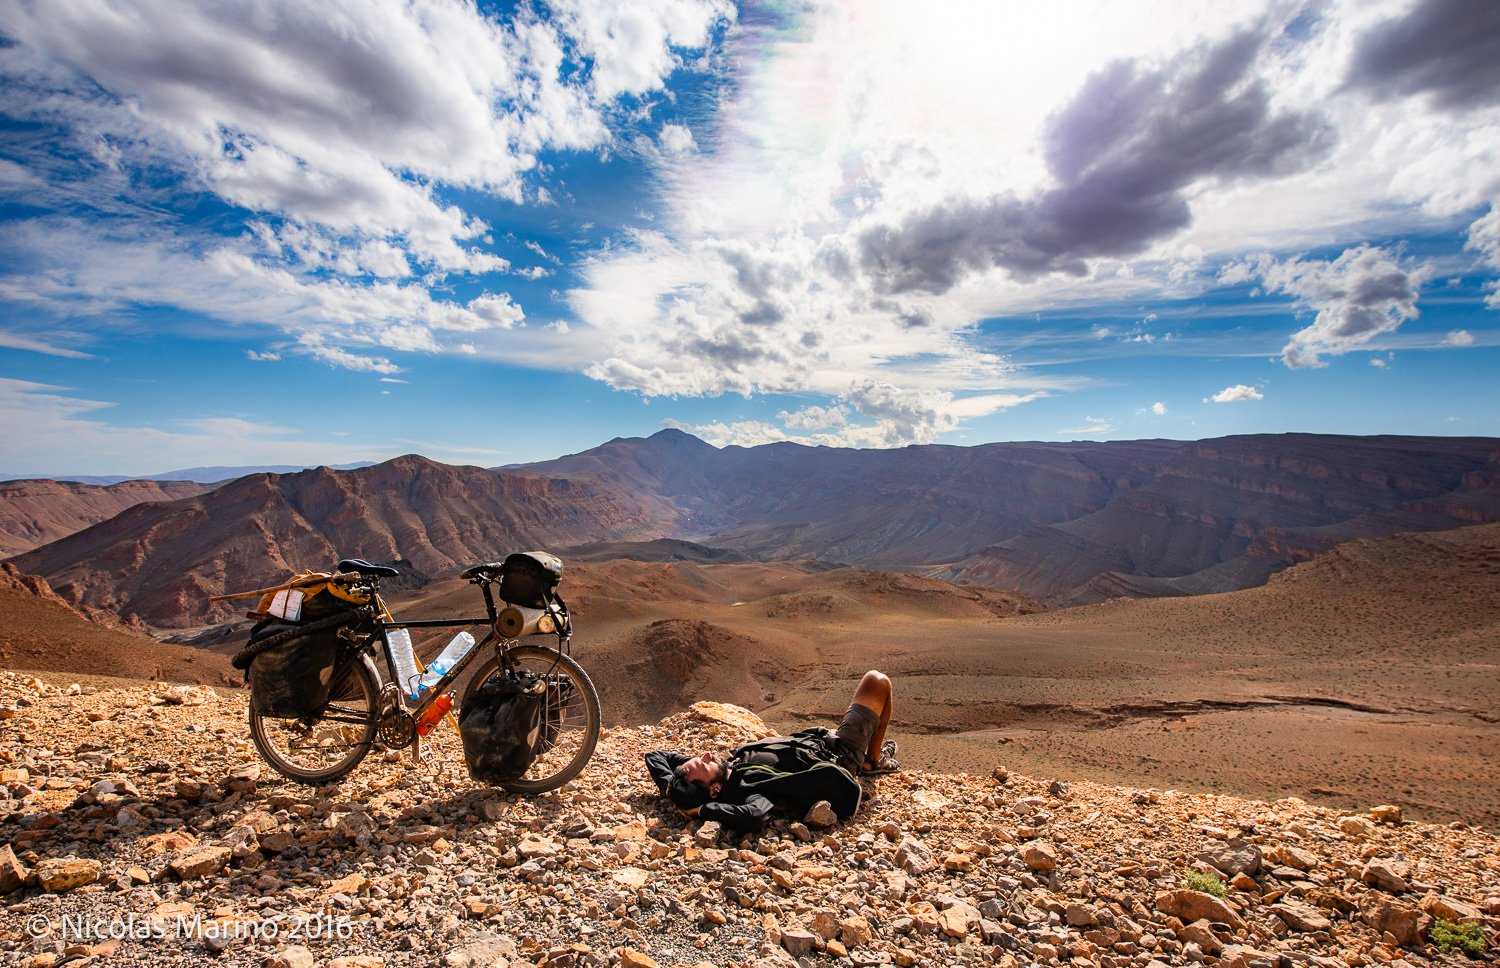  Cycling in the High Atlas. Morocco 